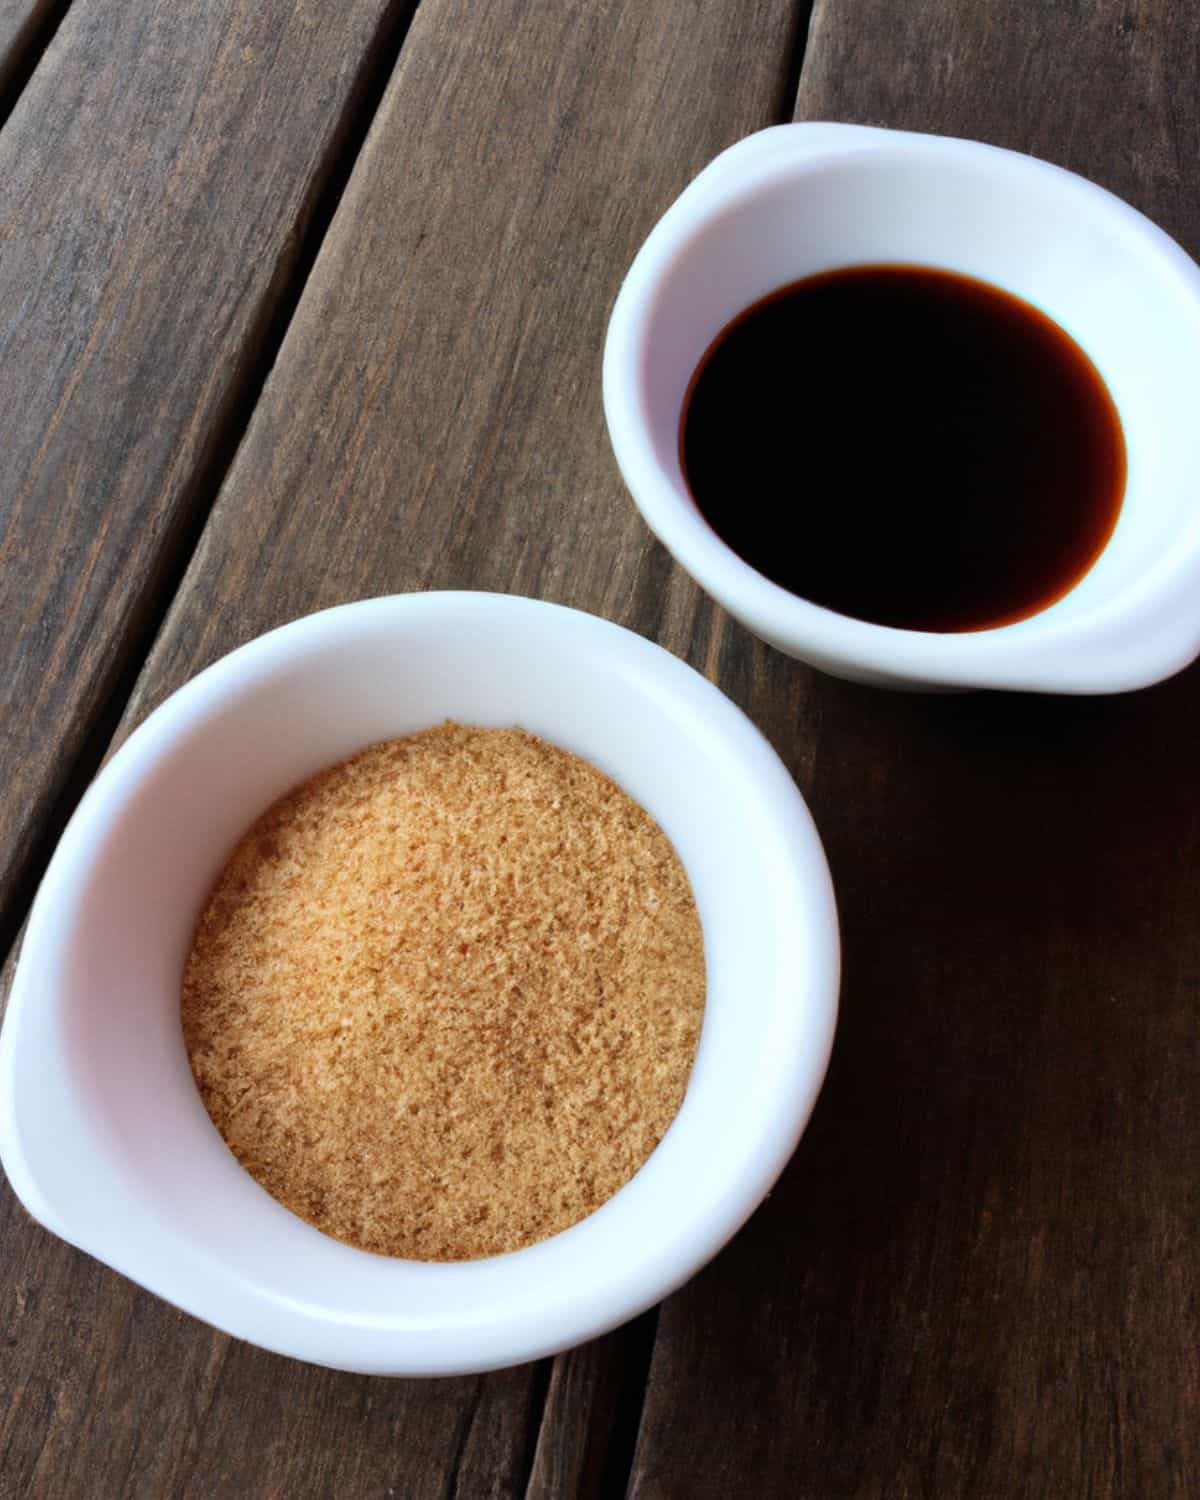 Sugar and dark soy sauce in white bowls.